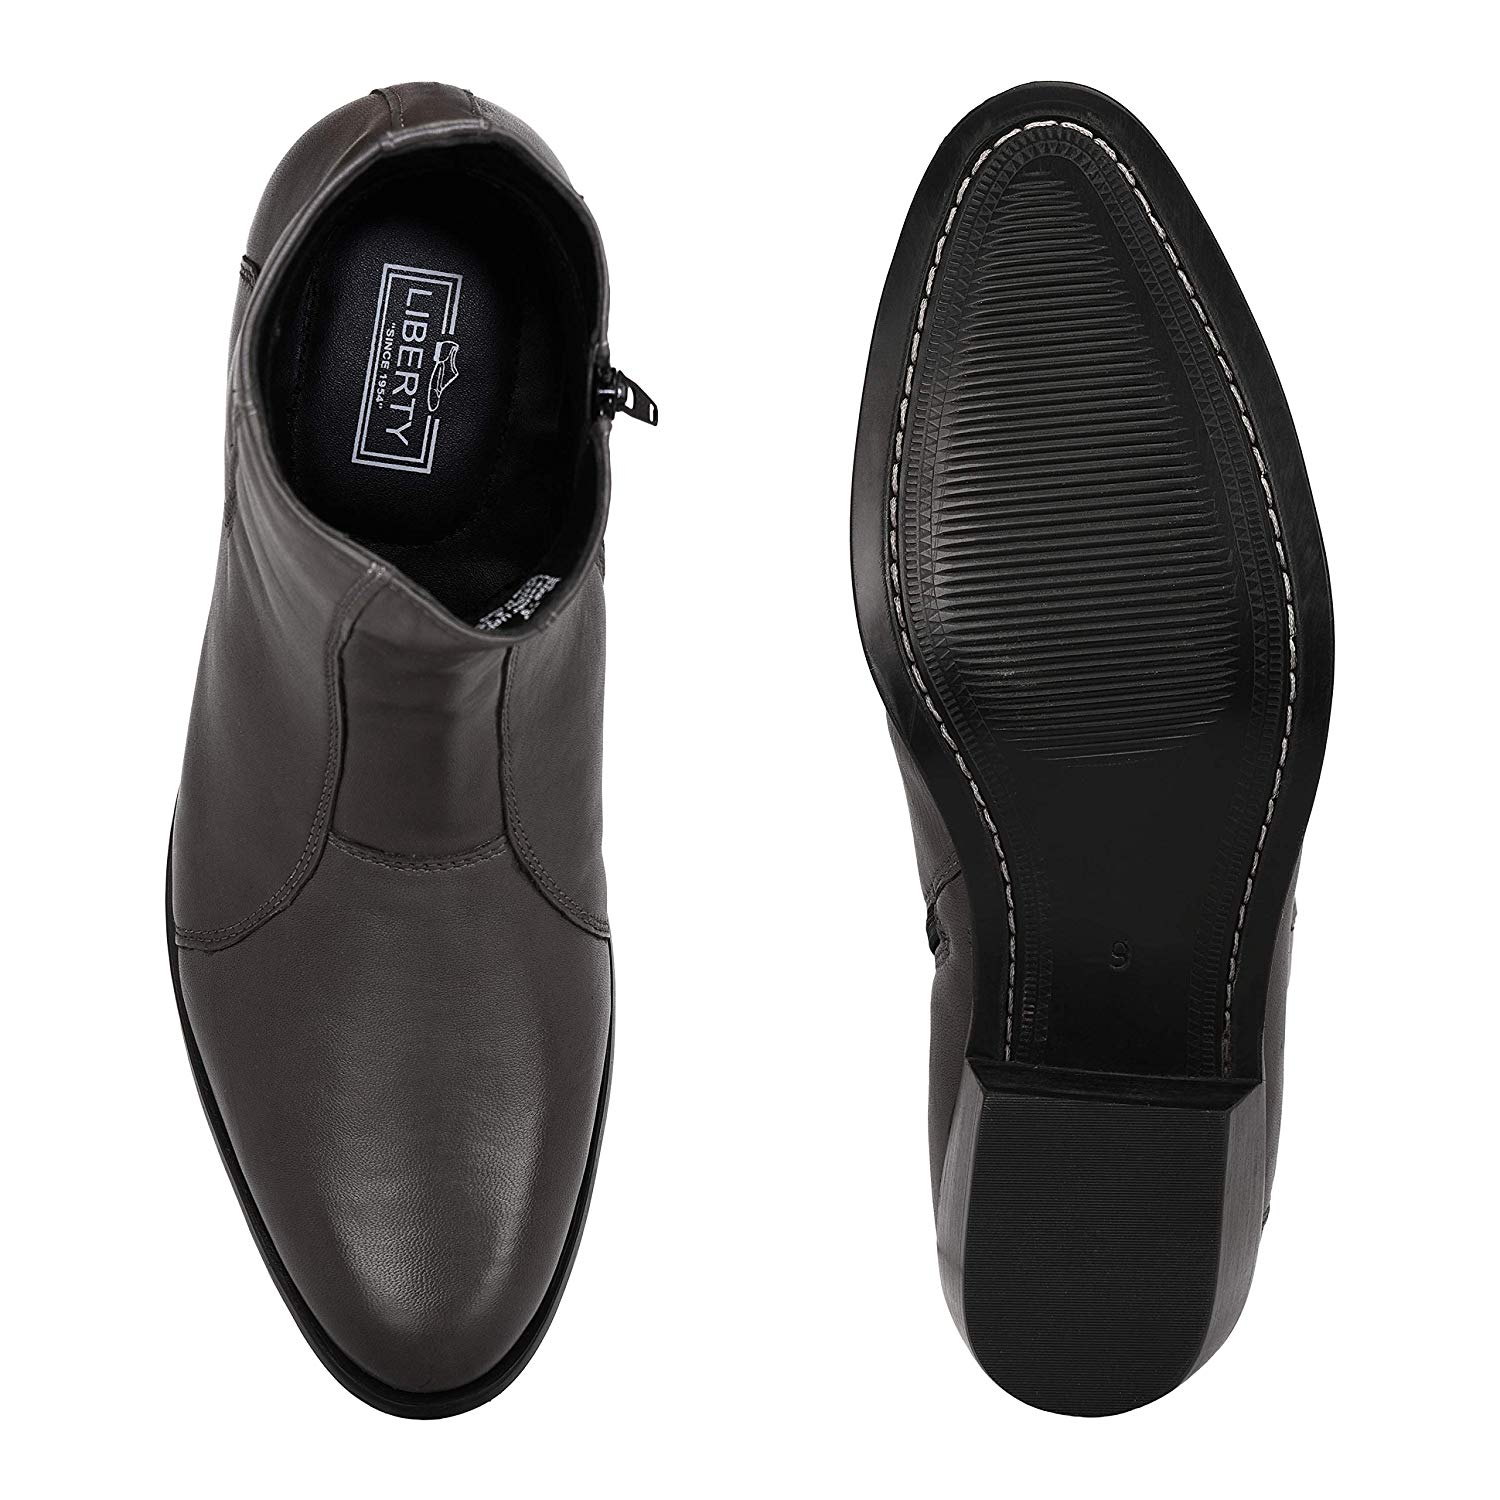 liberty black leather formal shoes